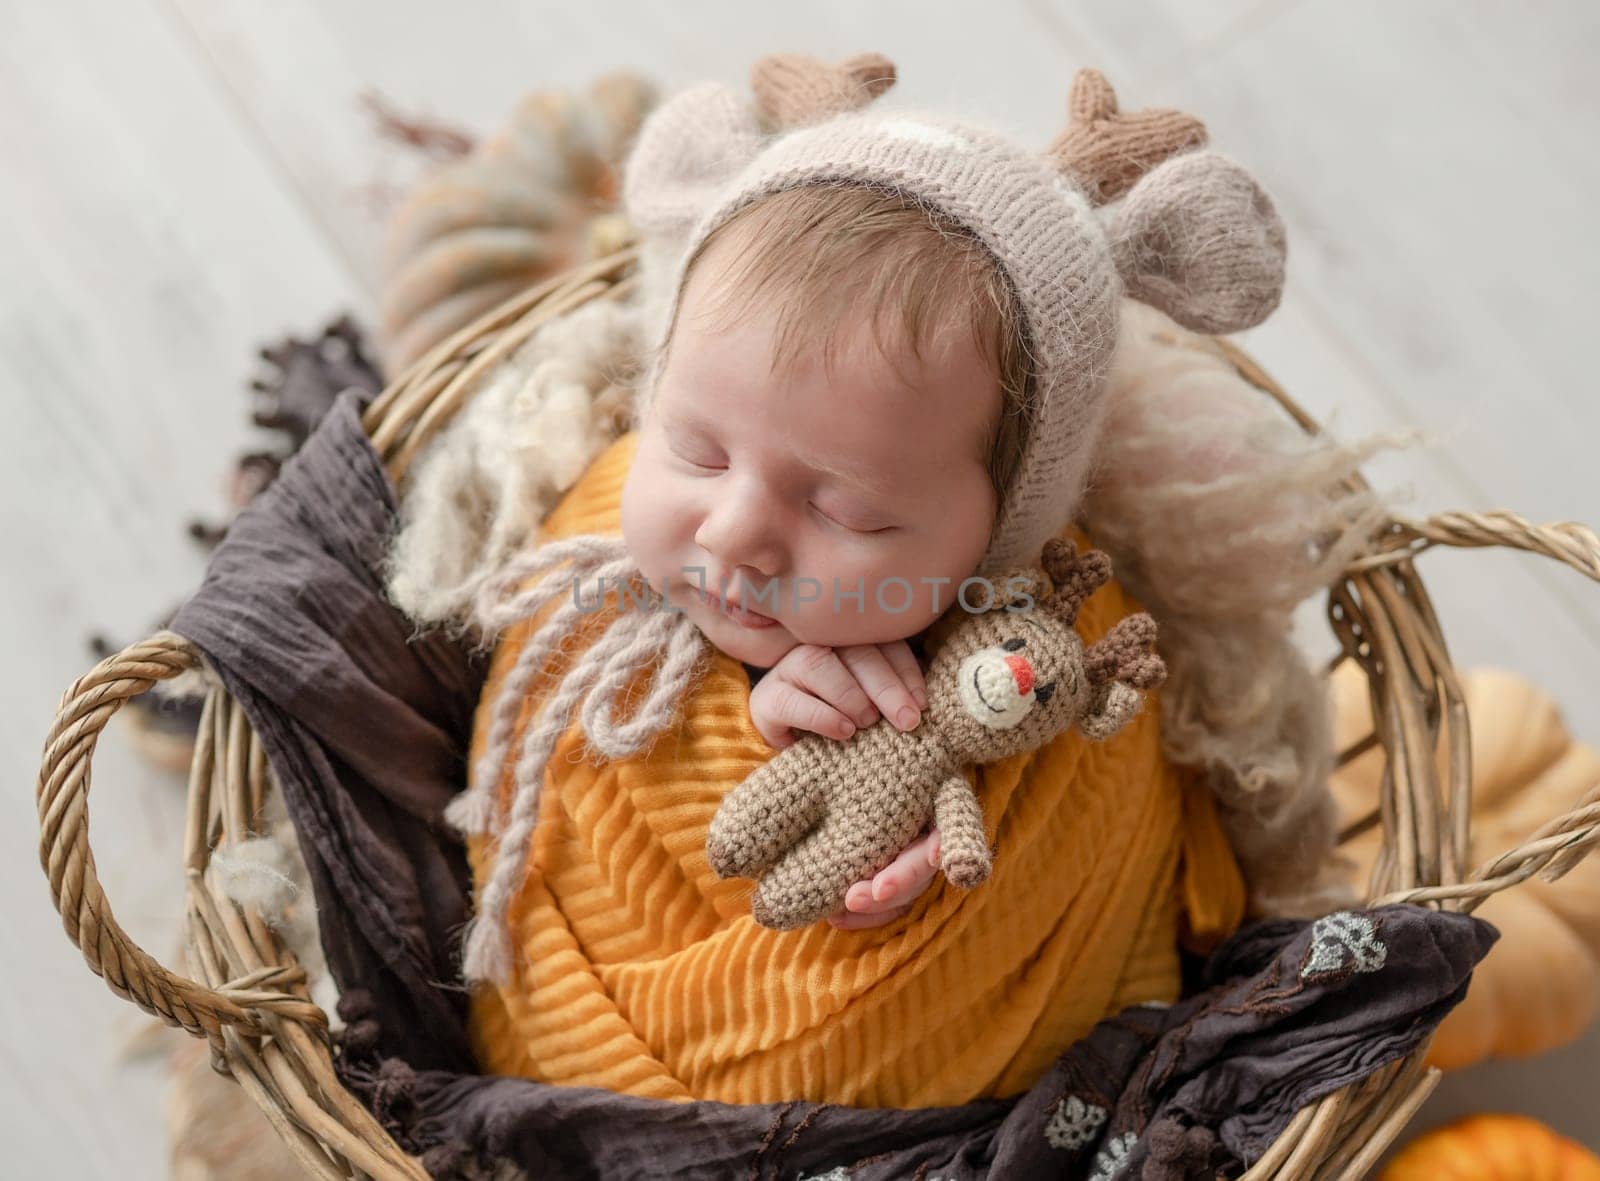 Newborn baby girl swaddled in white fabric sleeping in basket decorated with pumpkins. Infant child kid napping on fur autumn studio portrait